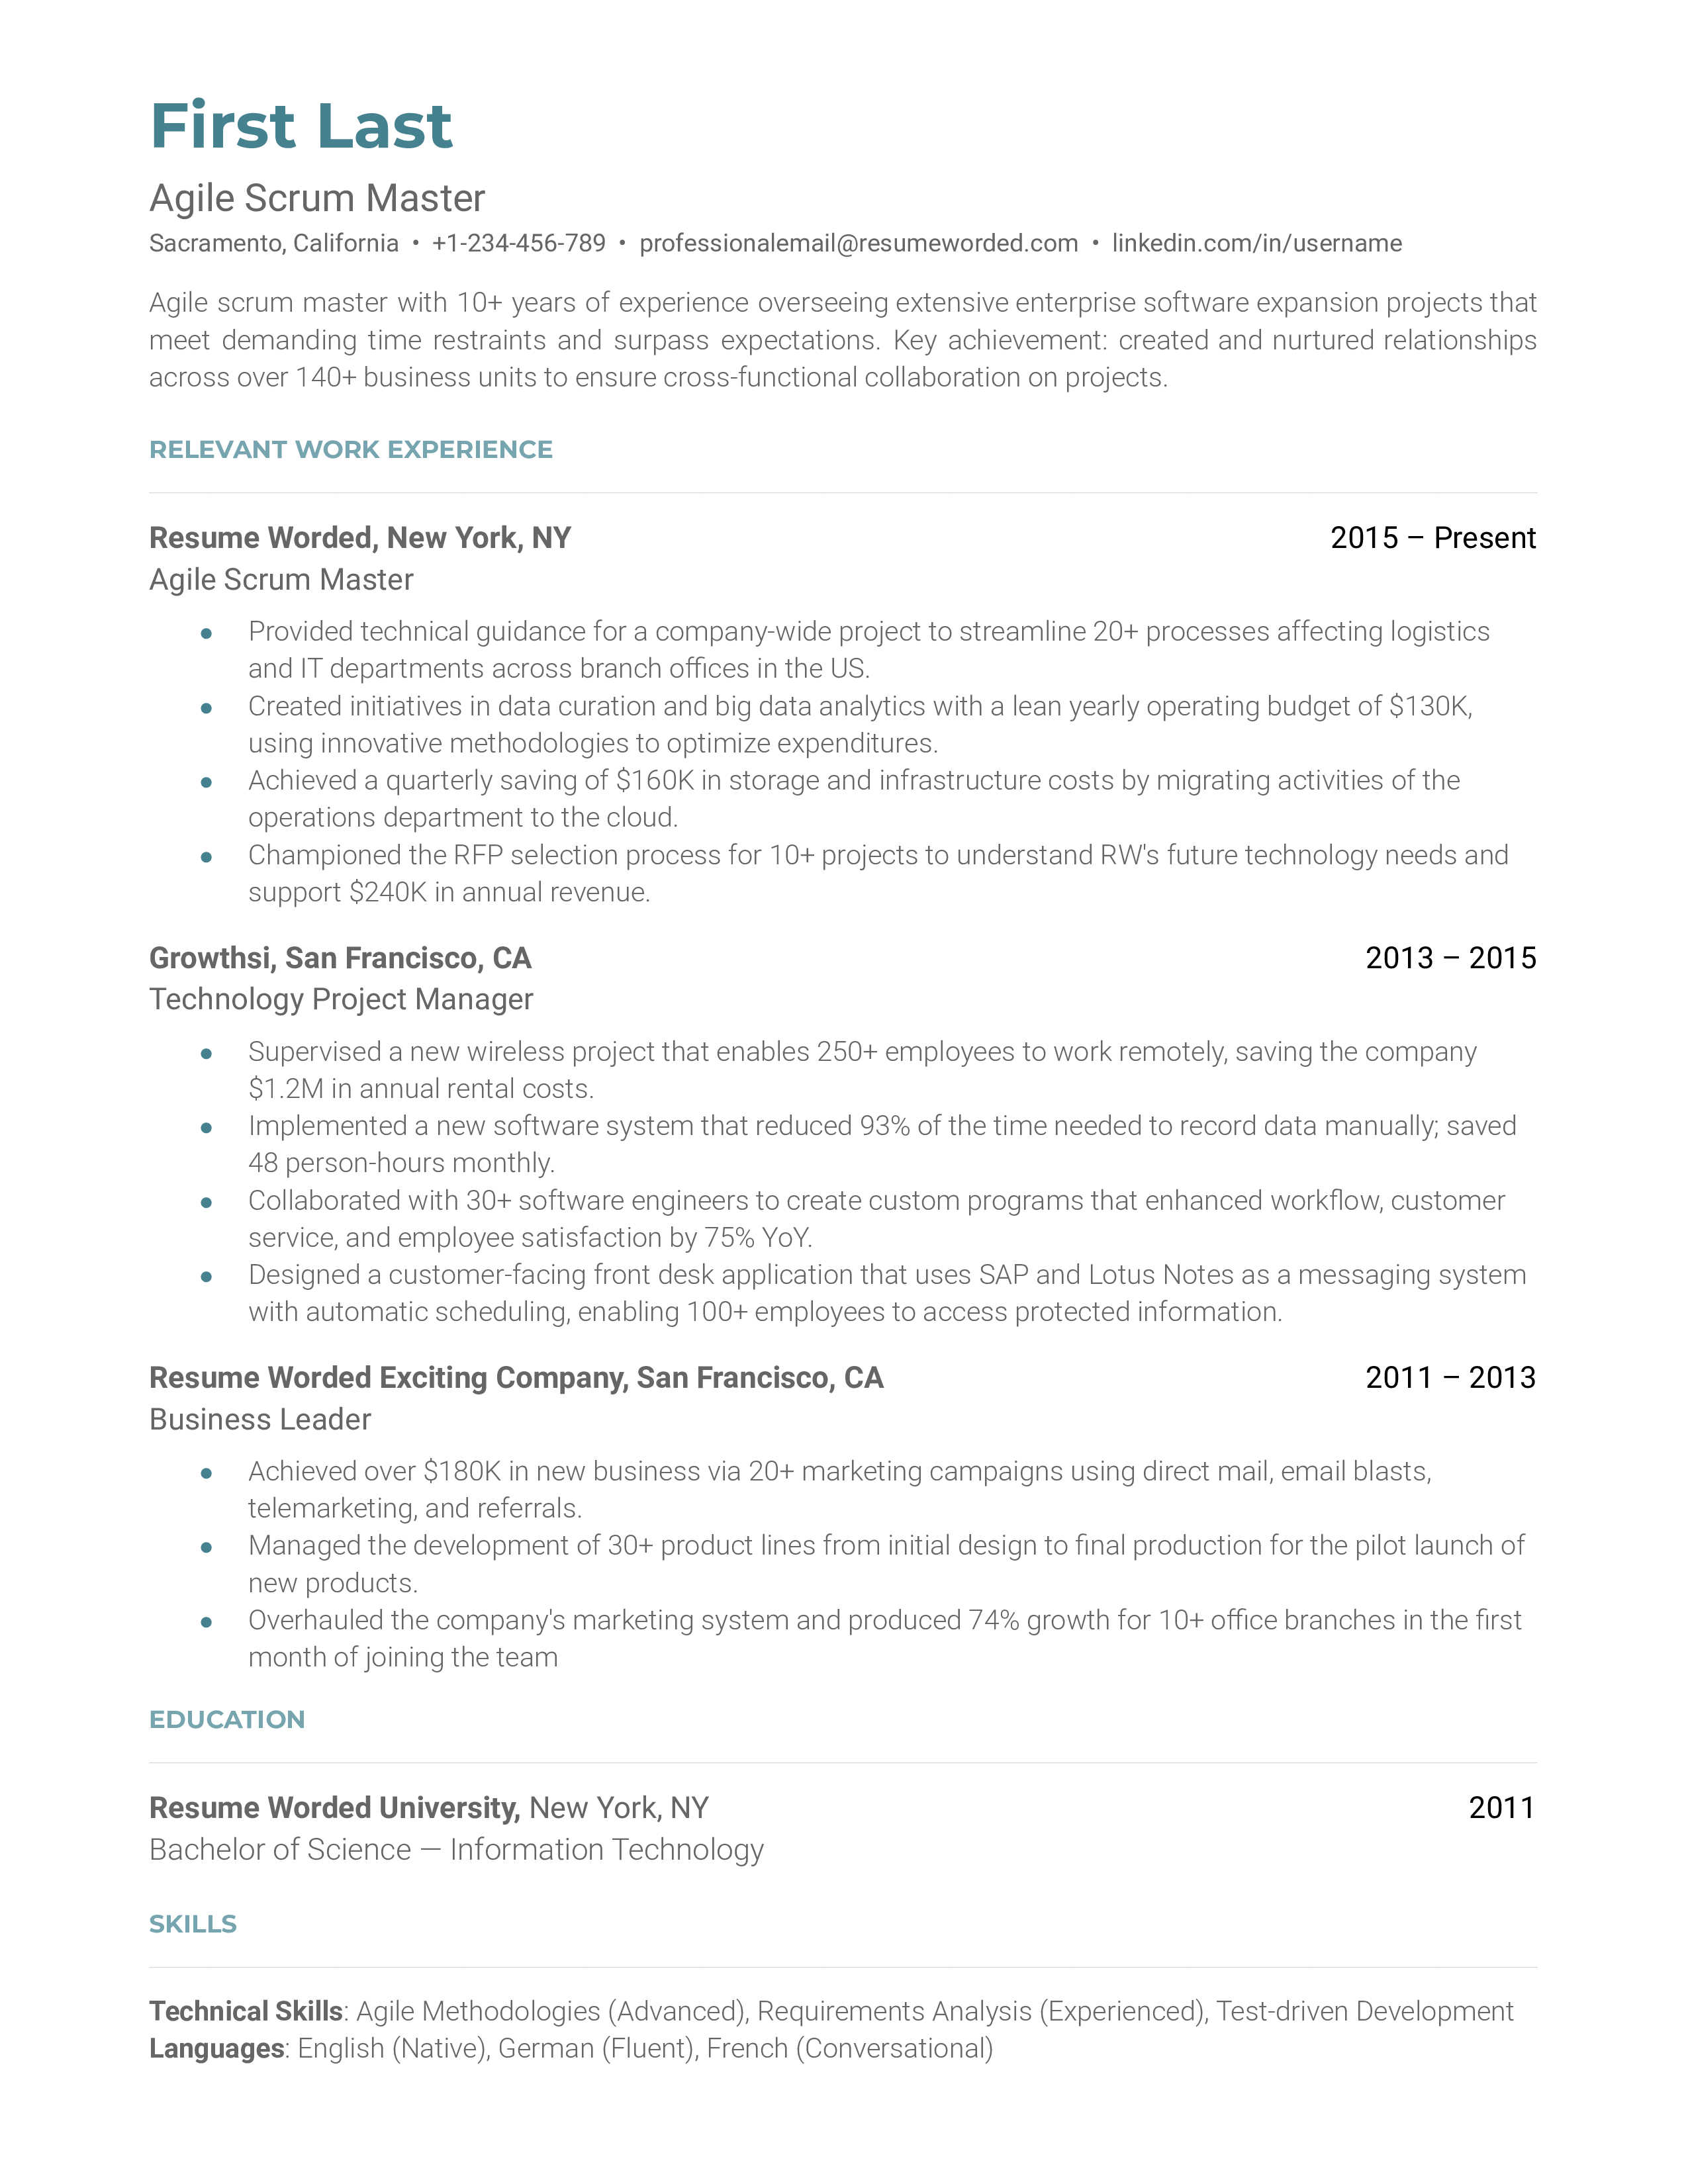 An Agile Scrum master resume template highlighting project management experience. 